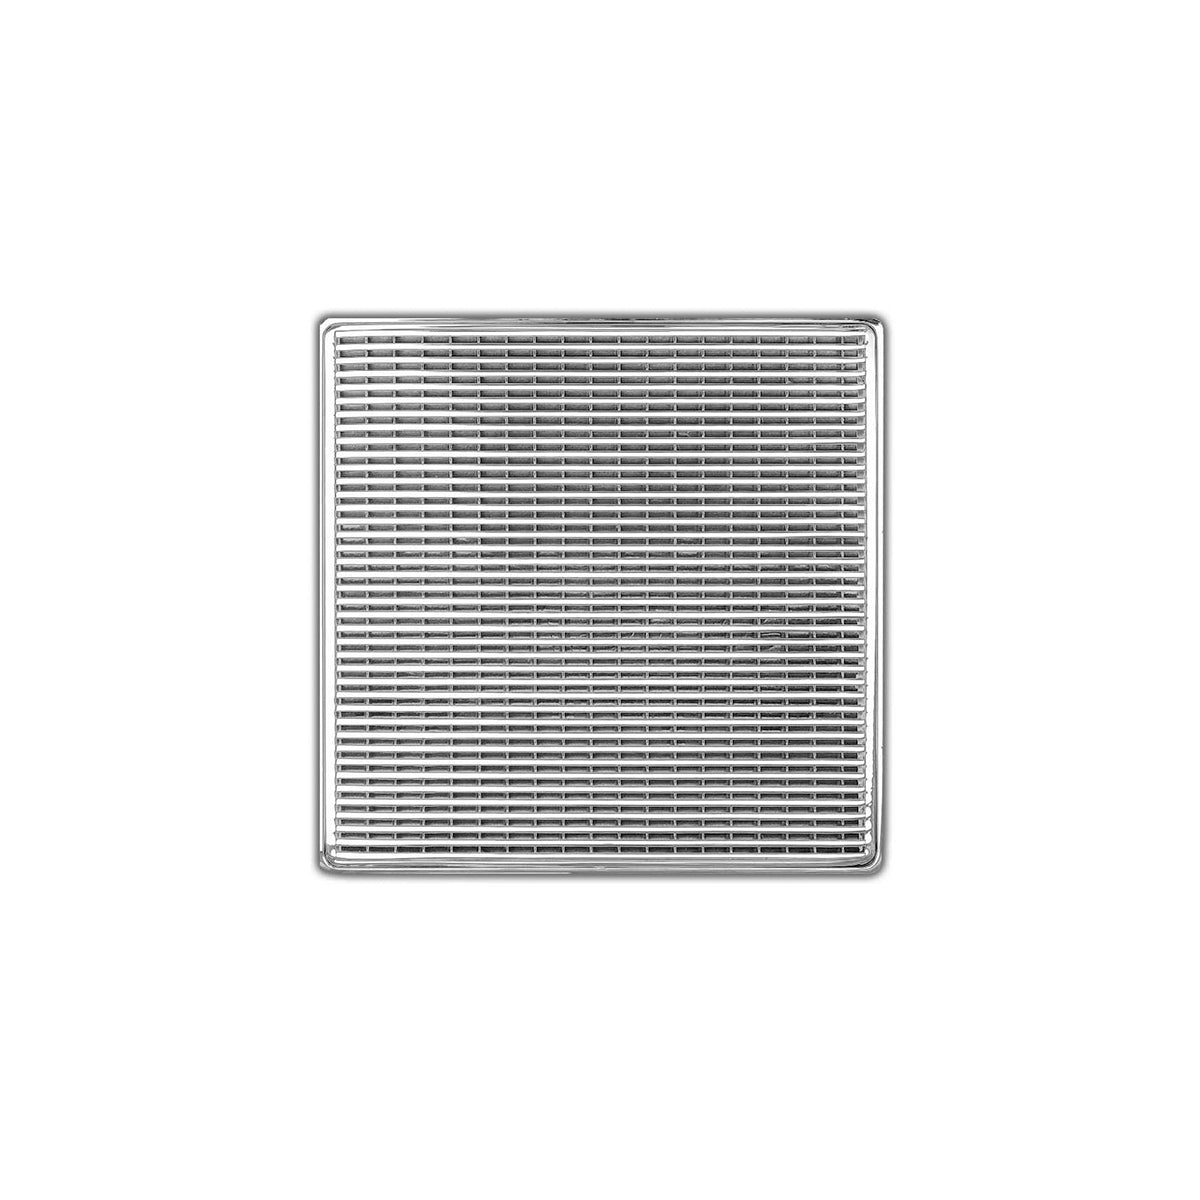 Infinity Drain 5" x 5" WD 5 High Flow Premium Center Drain Kit with Wedge Wire Pattern Decorative Plate with Cast Iron Drain Body, 3" No-Hub Outlet